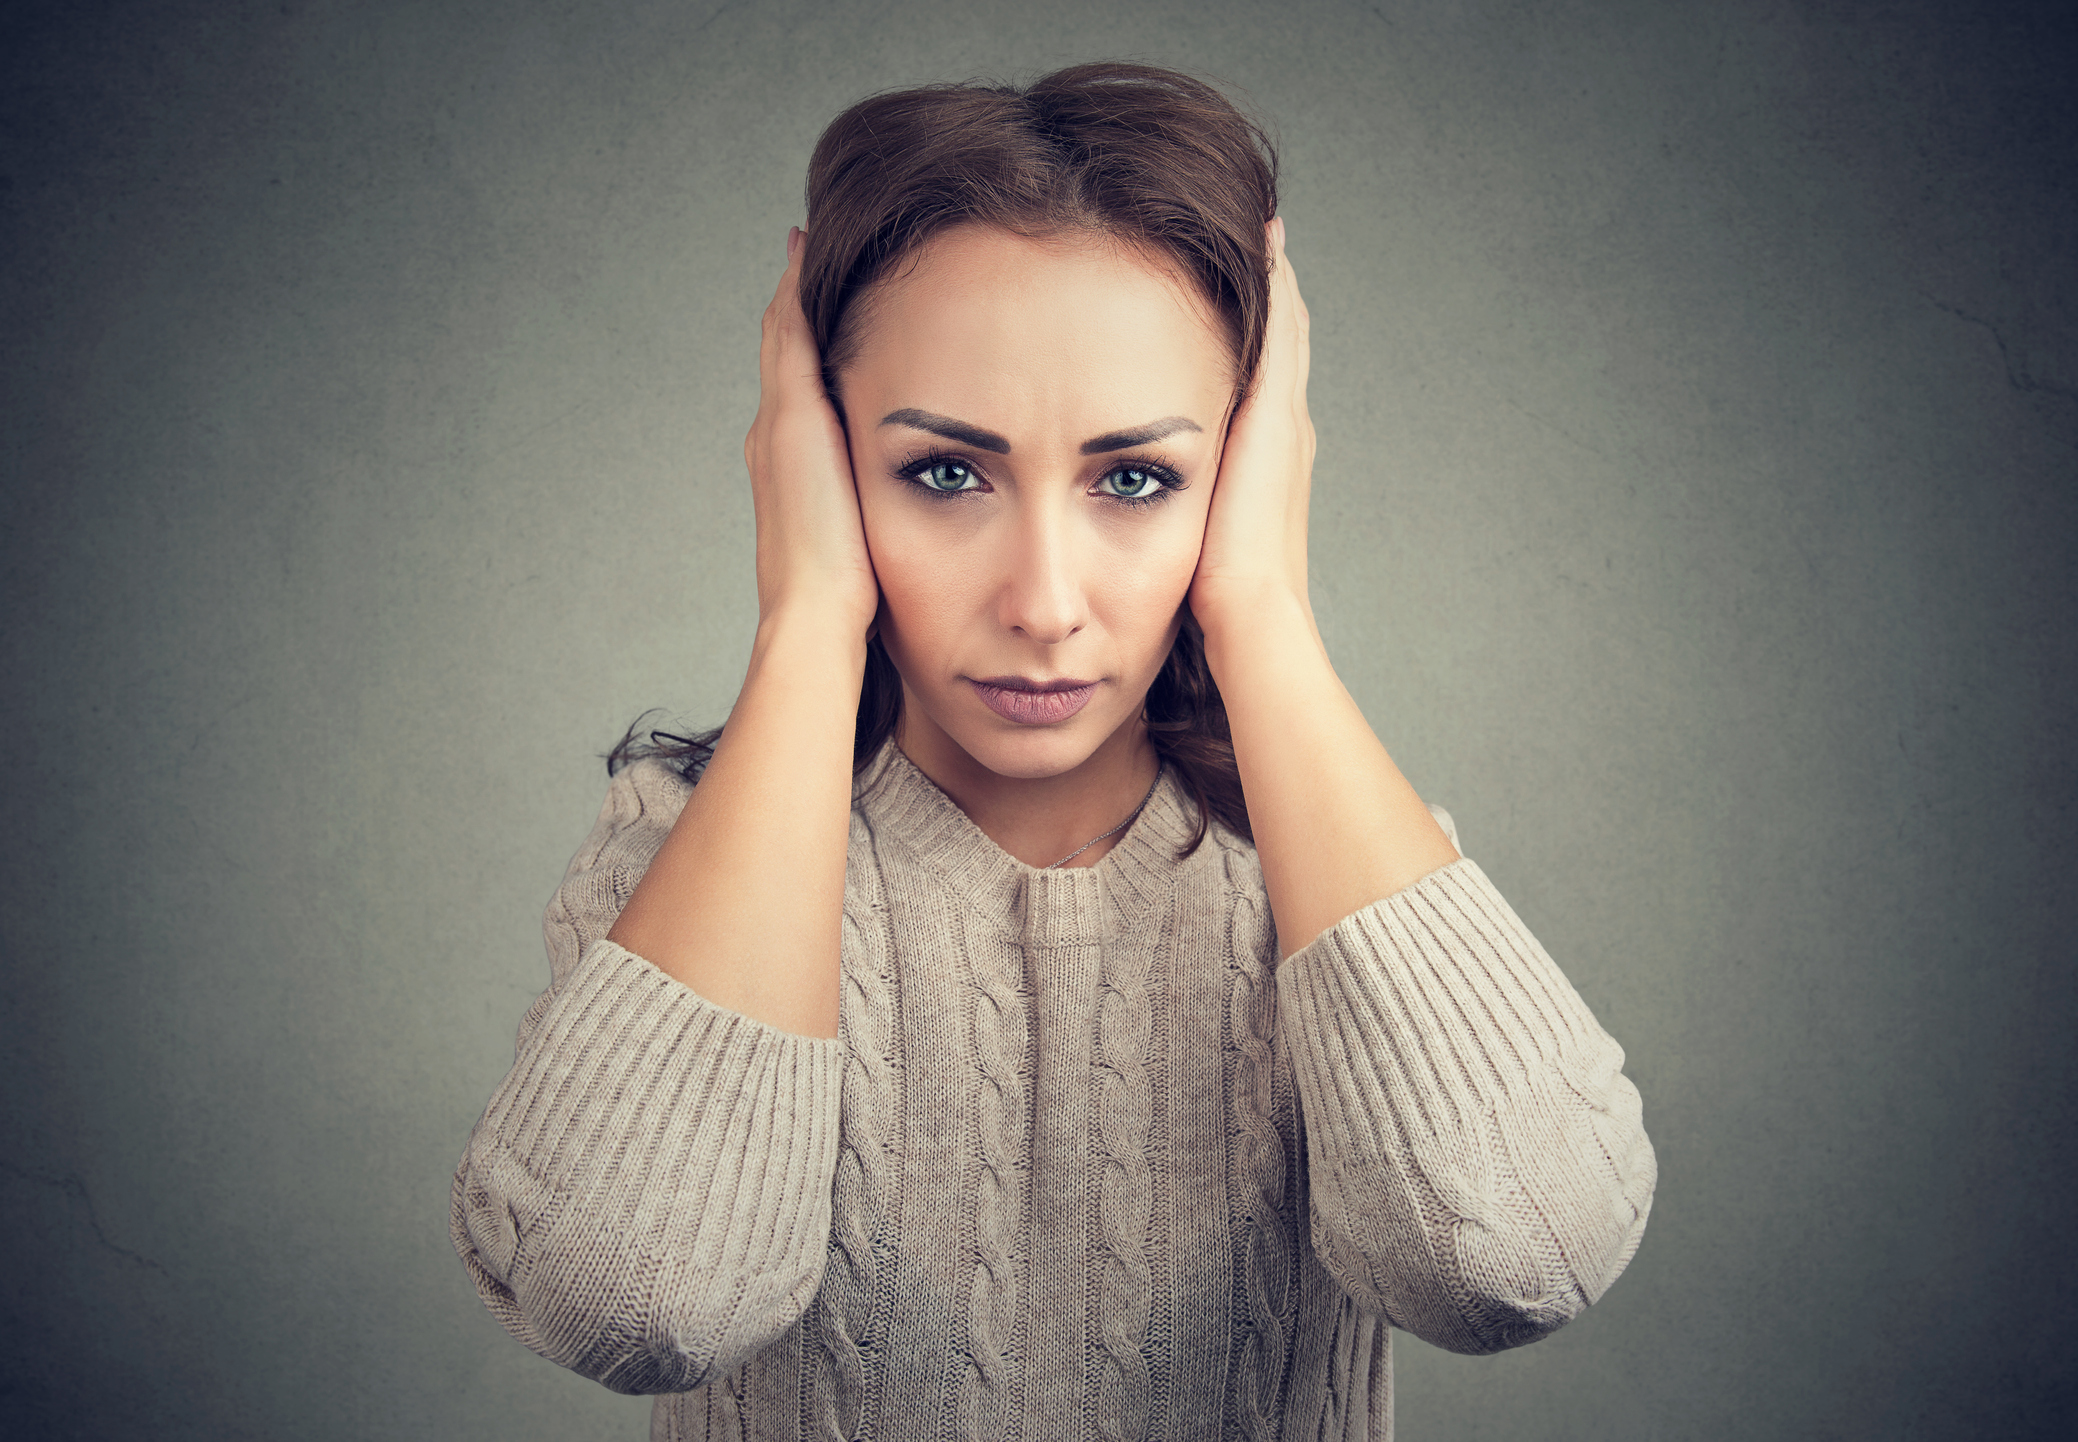 When sound drives you crazy: Misophonia, tinnitus, phonophobia and more